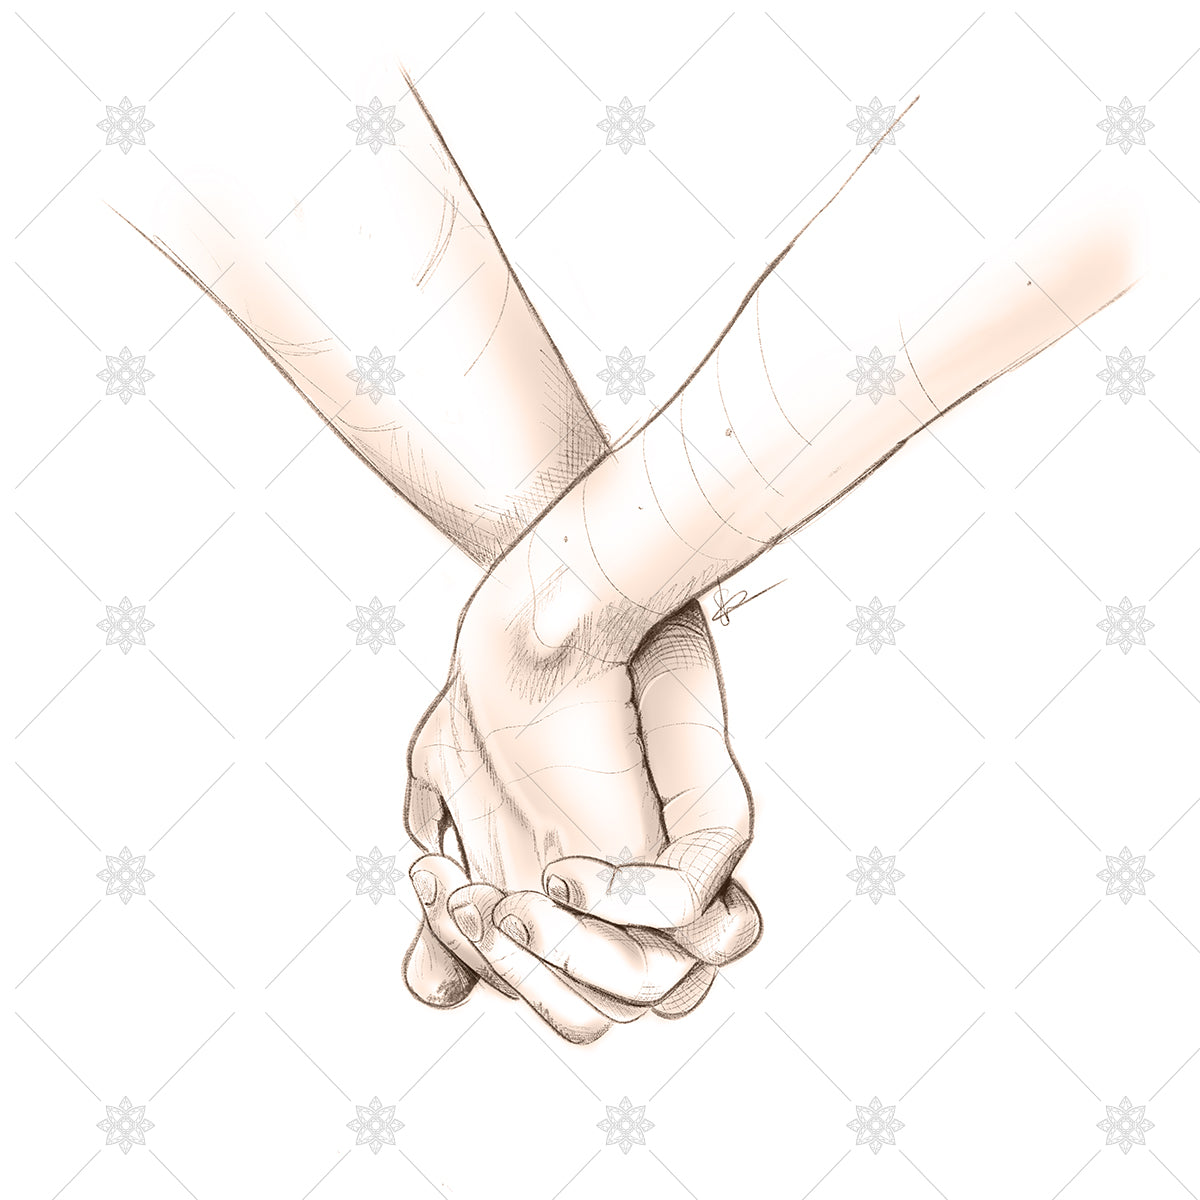 couple holding hands pencil sketch